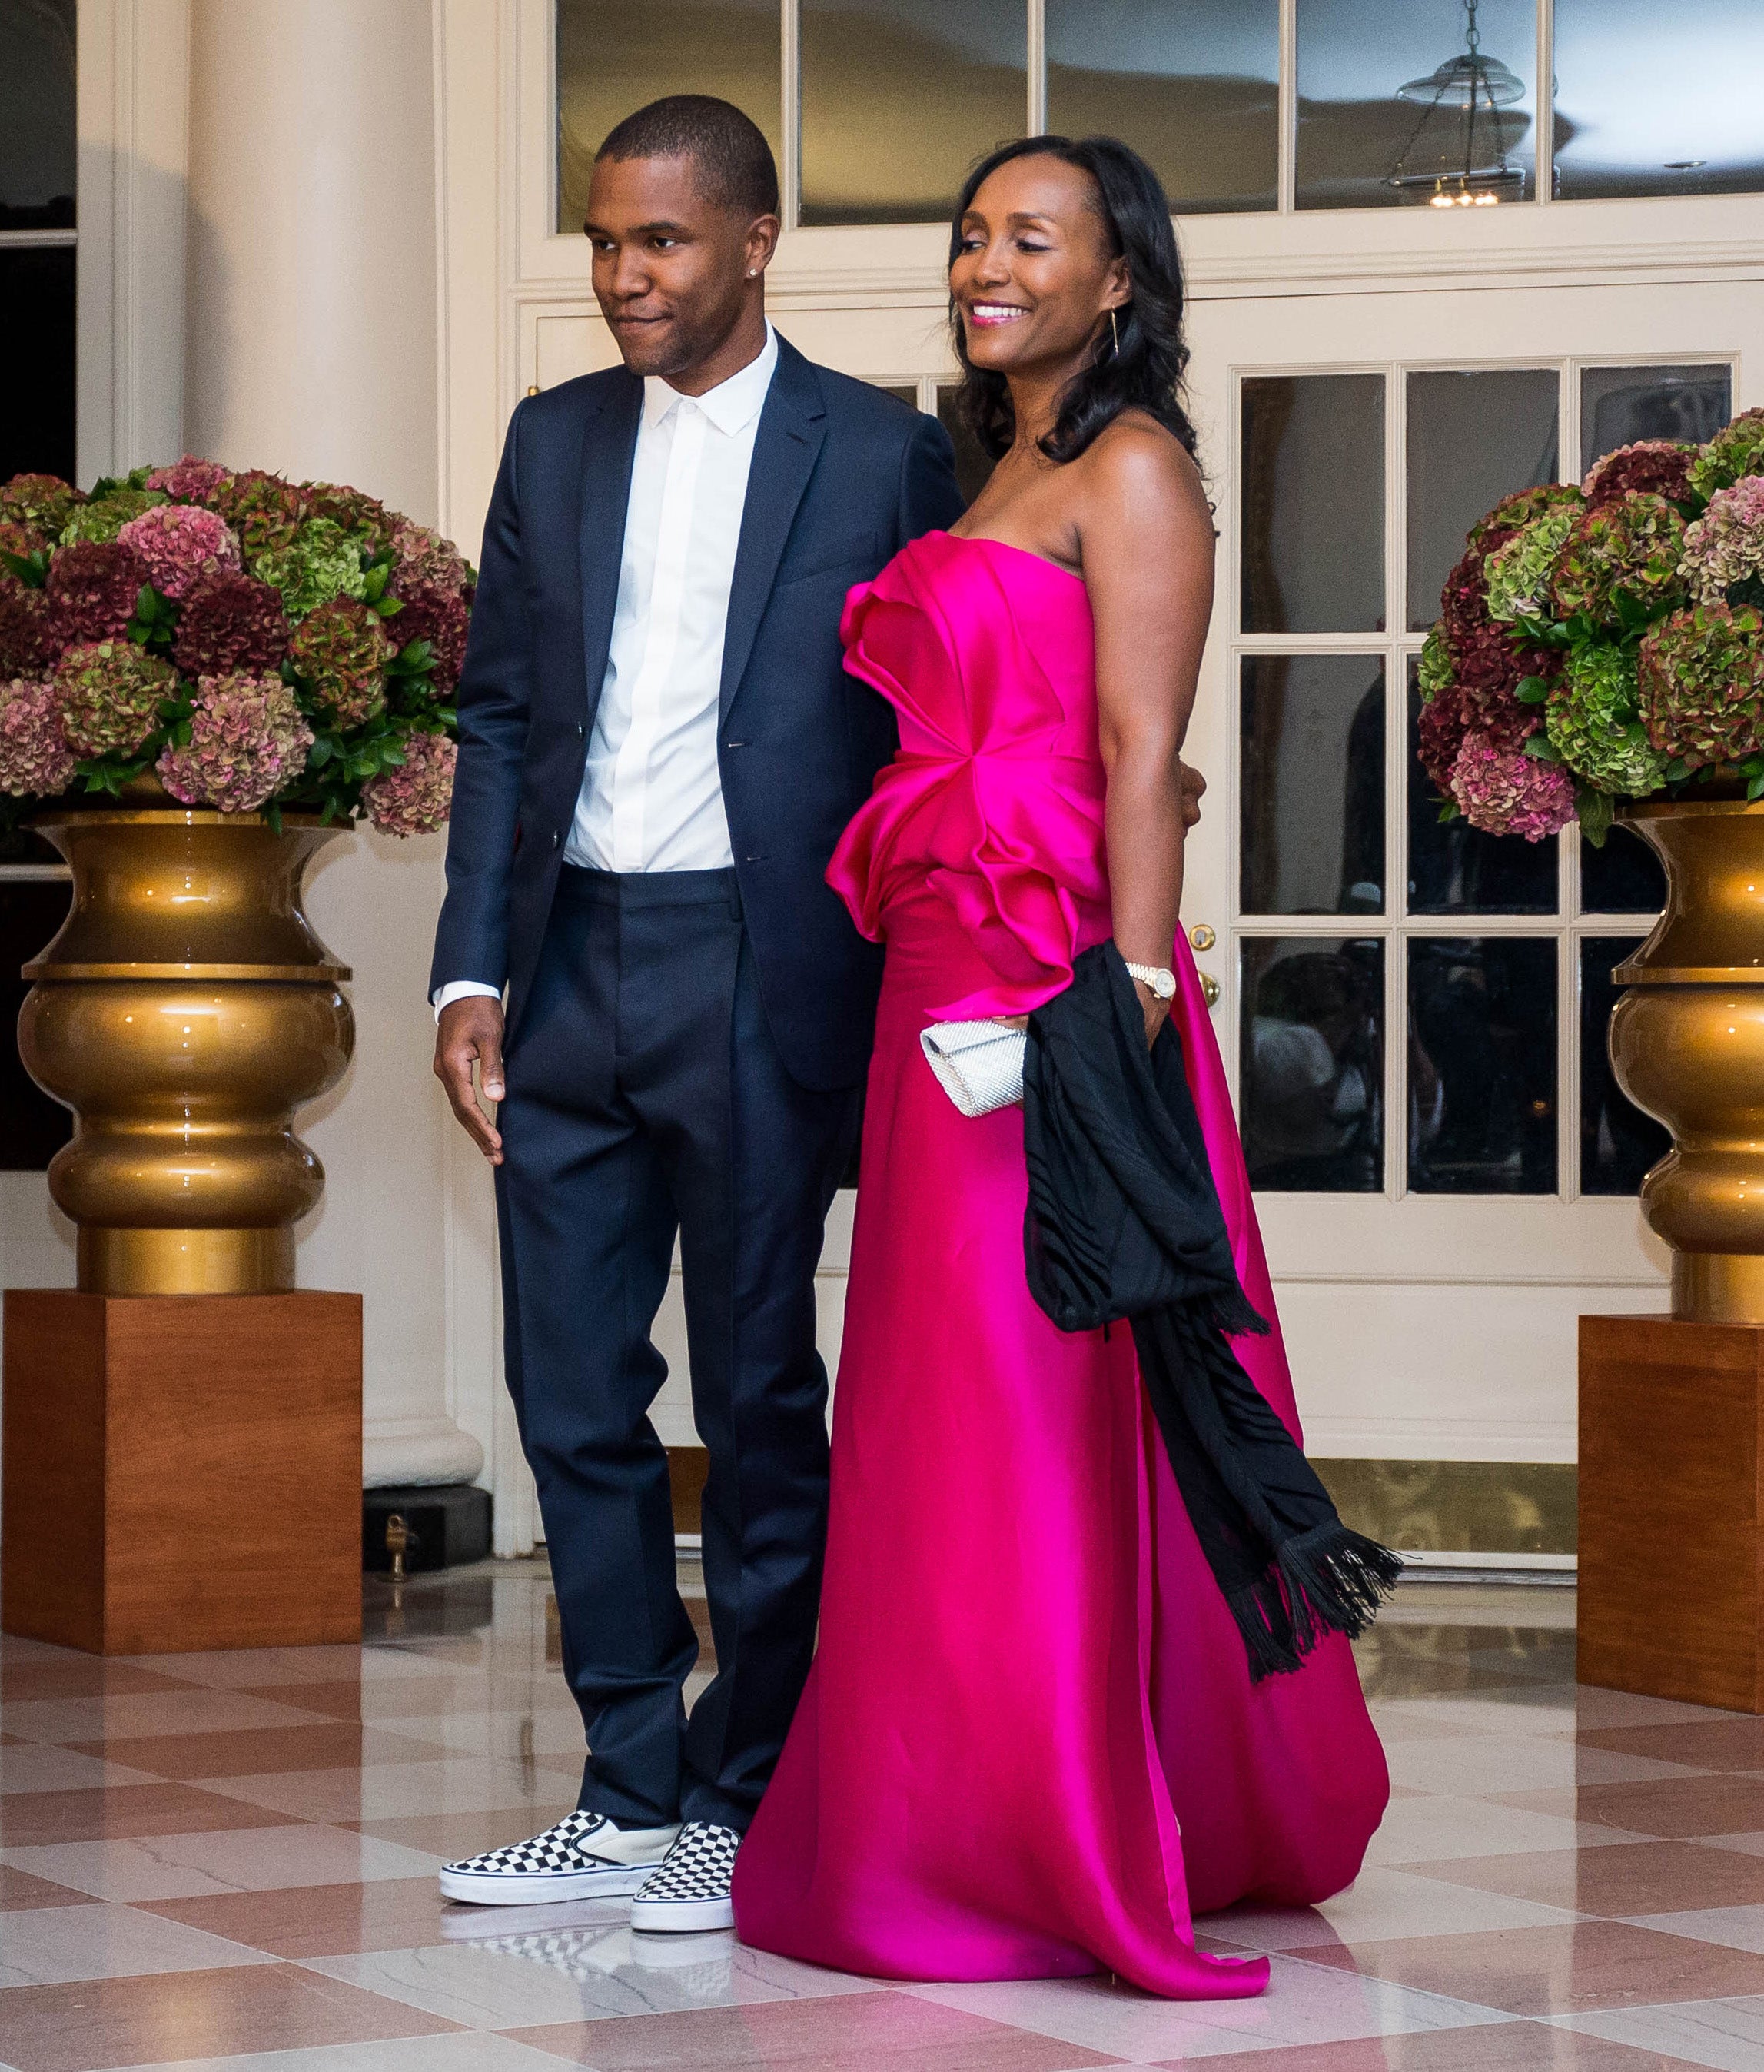 Frank Ocean And Chance The Rapper's Parents Were The Real Stars Of The White House State Dinner
